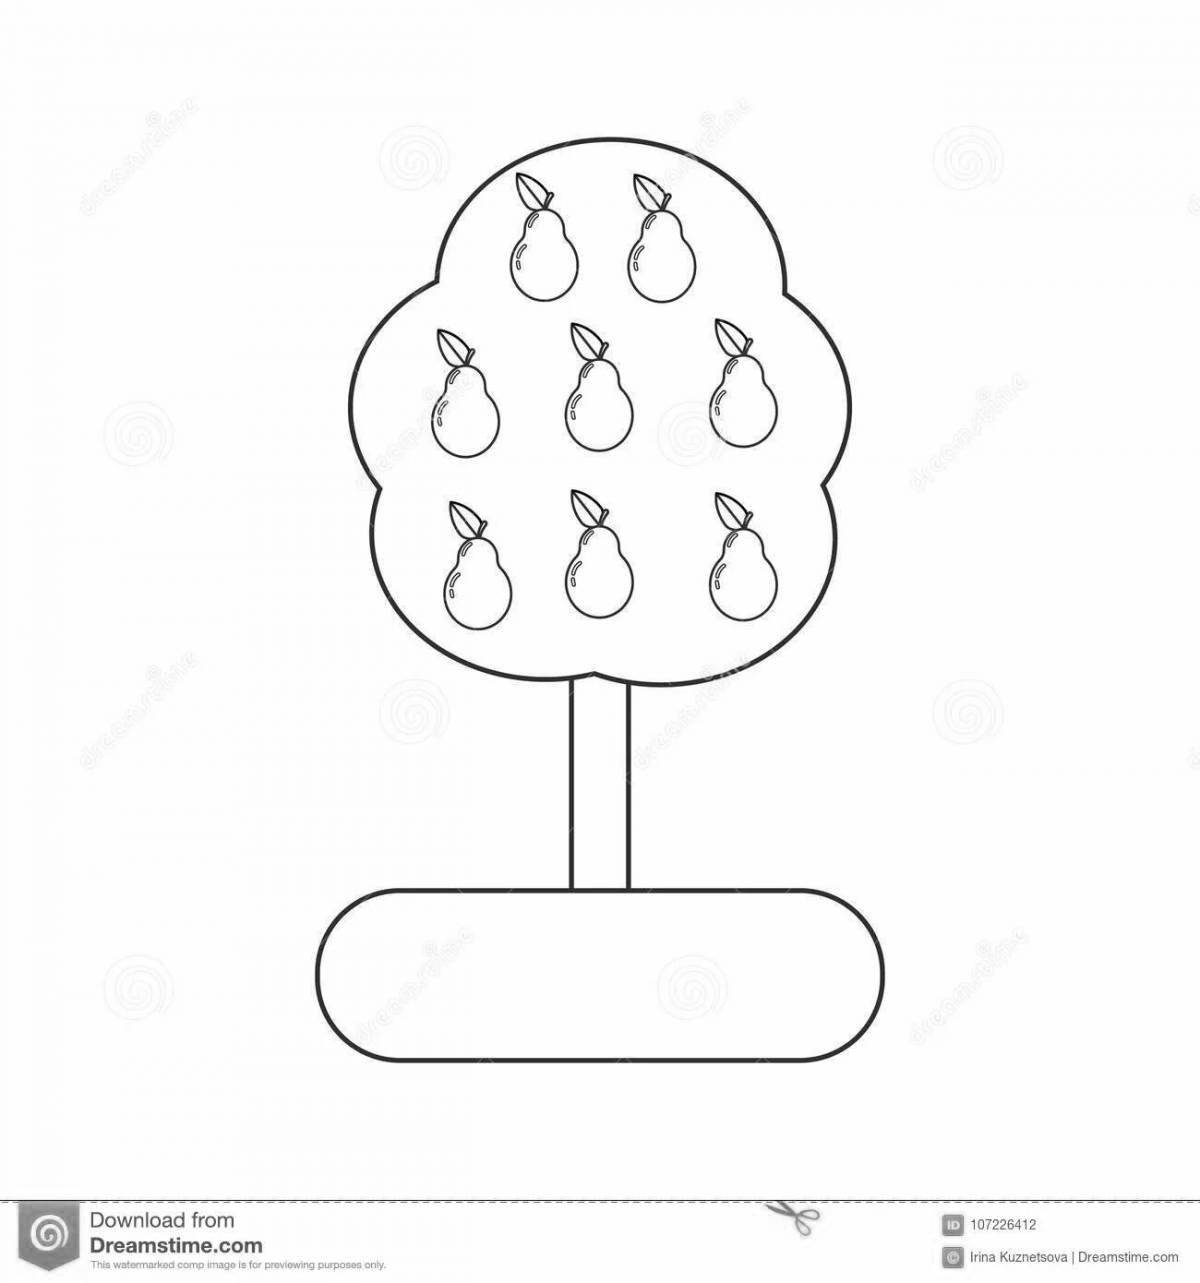 Charming pear coloring page